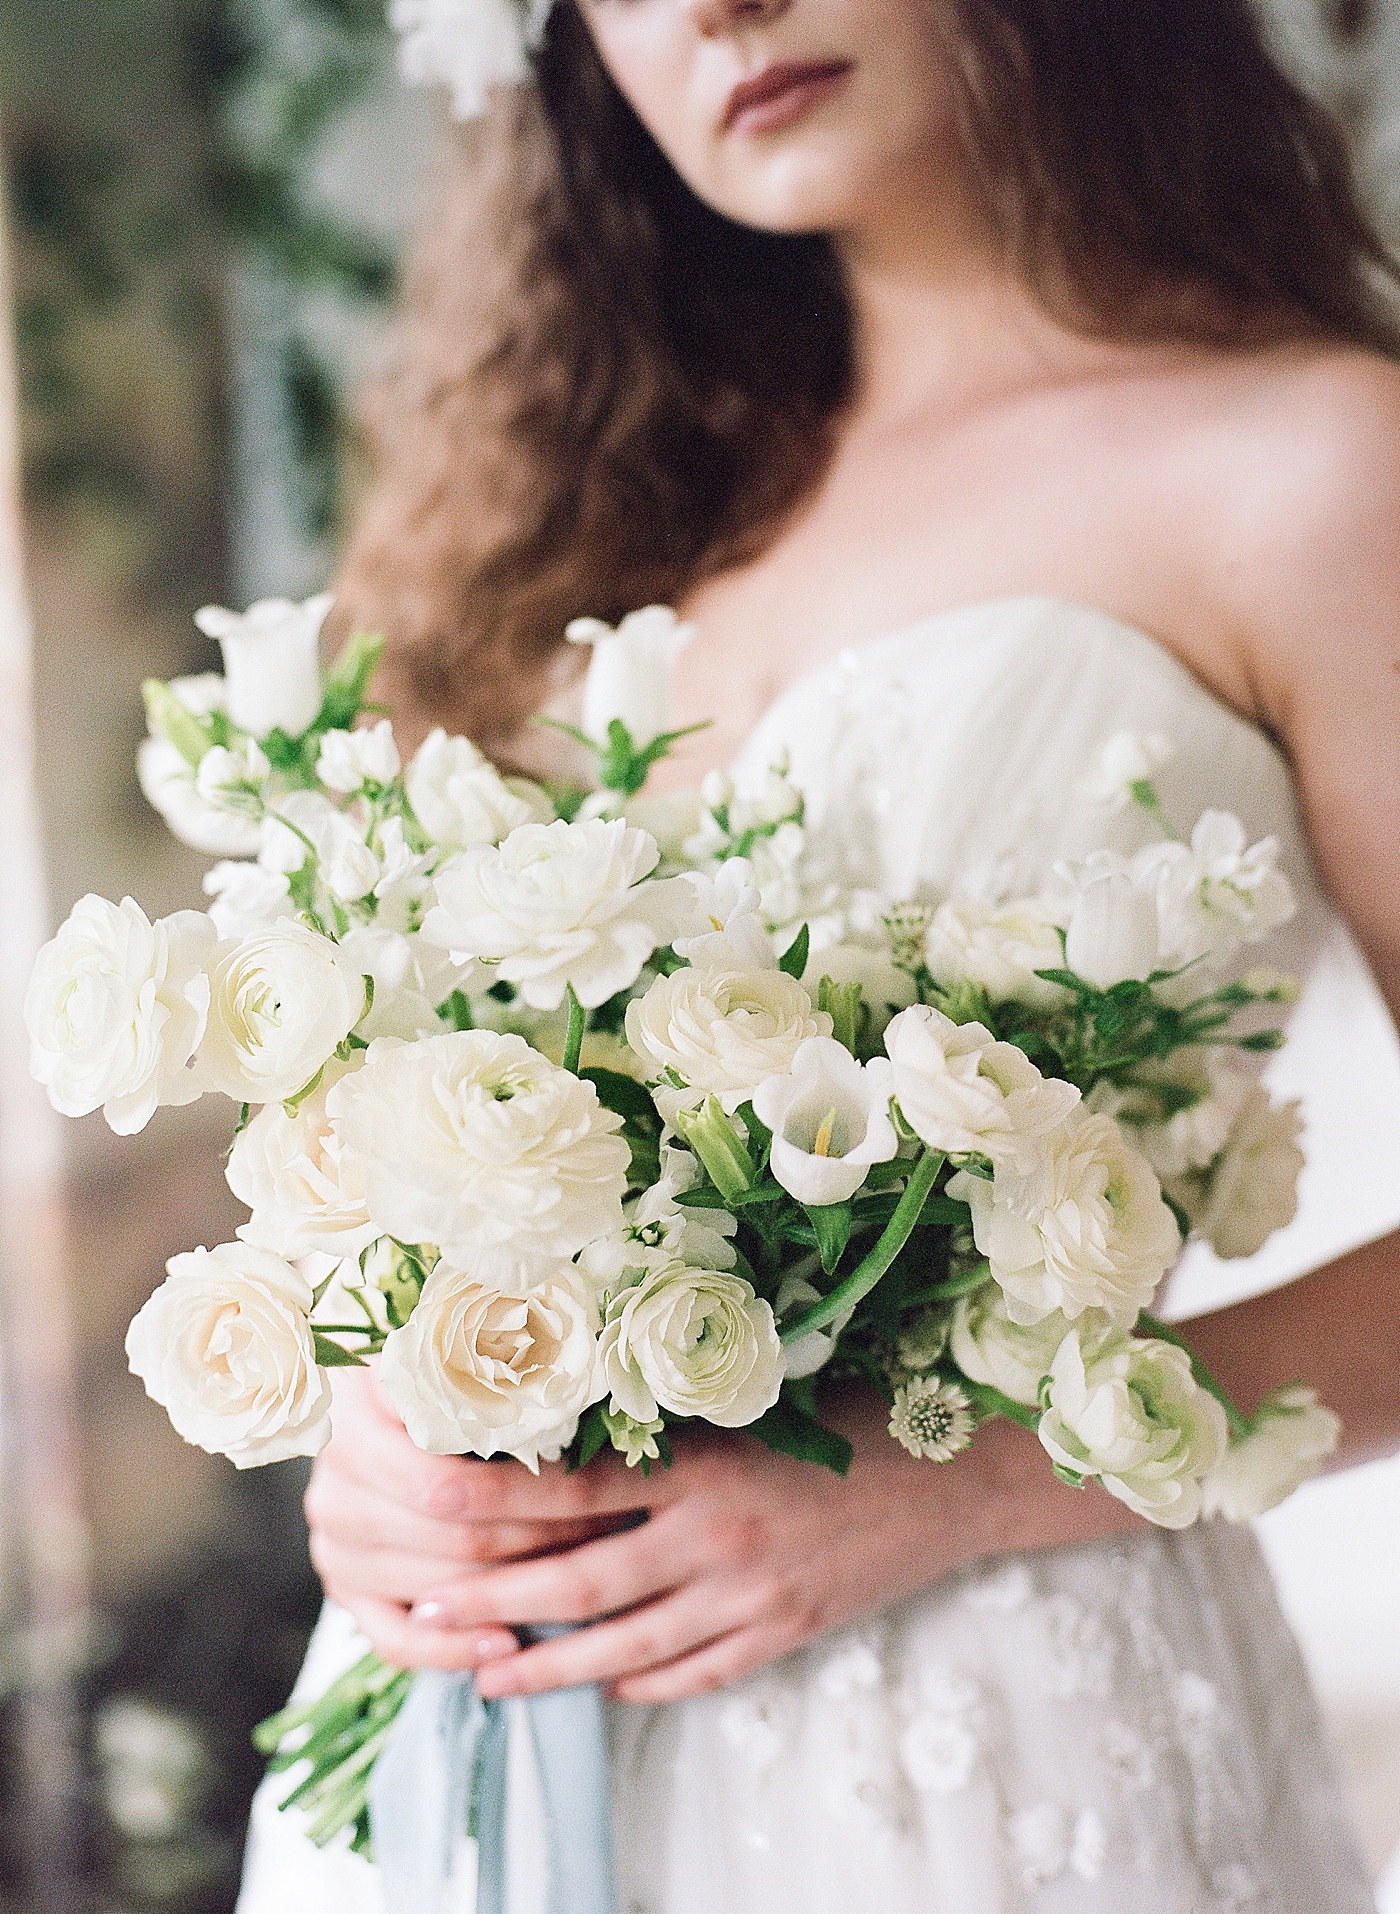 Bouquet of white flowers | Photo by Hope Helmuth Photograpghy